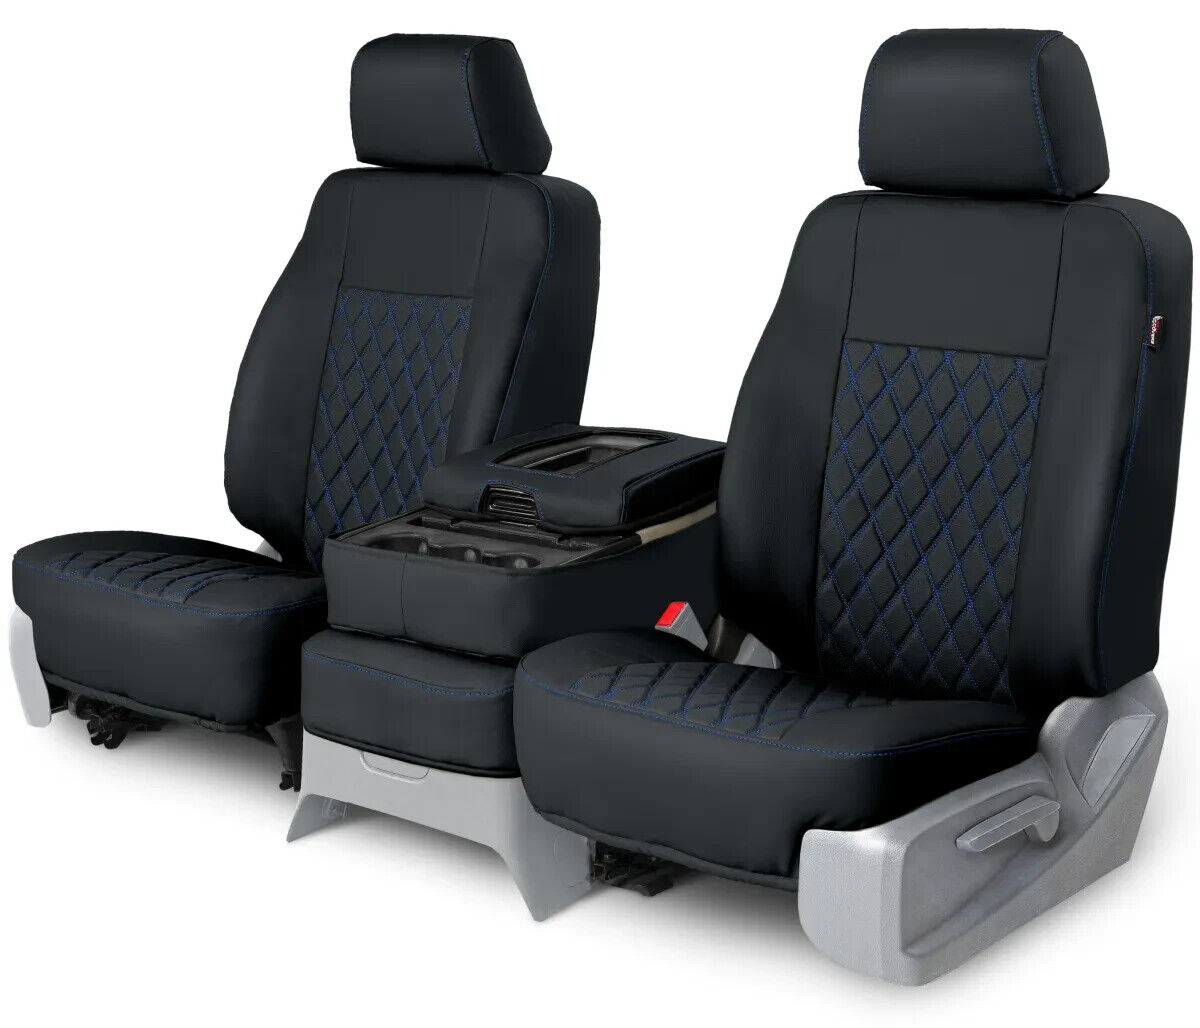 CUSTOM LEATHERETTE FRONT & REAR SEAT COVERS for the 2007-2013 Toyota Tundra Crew